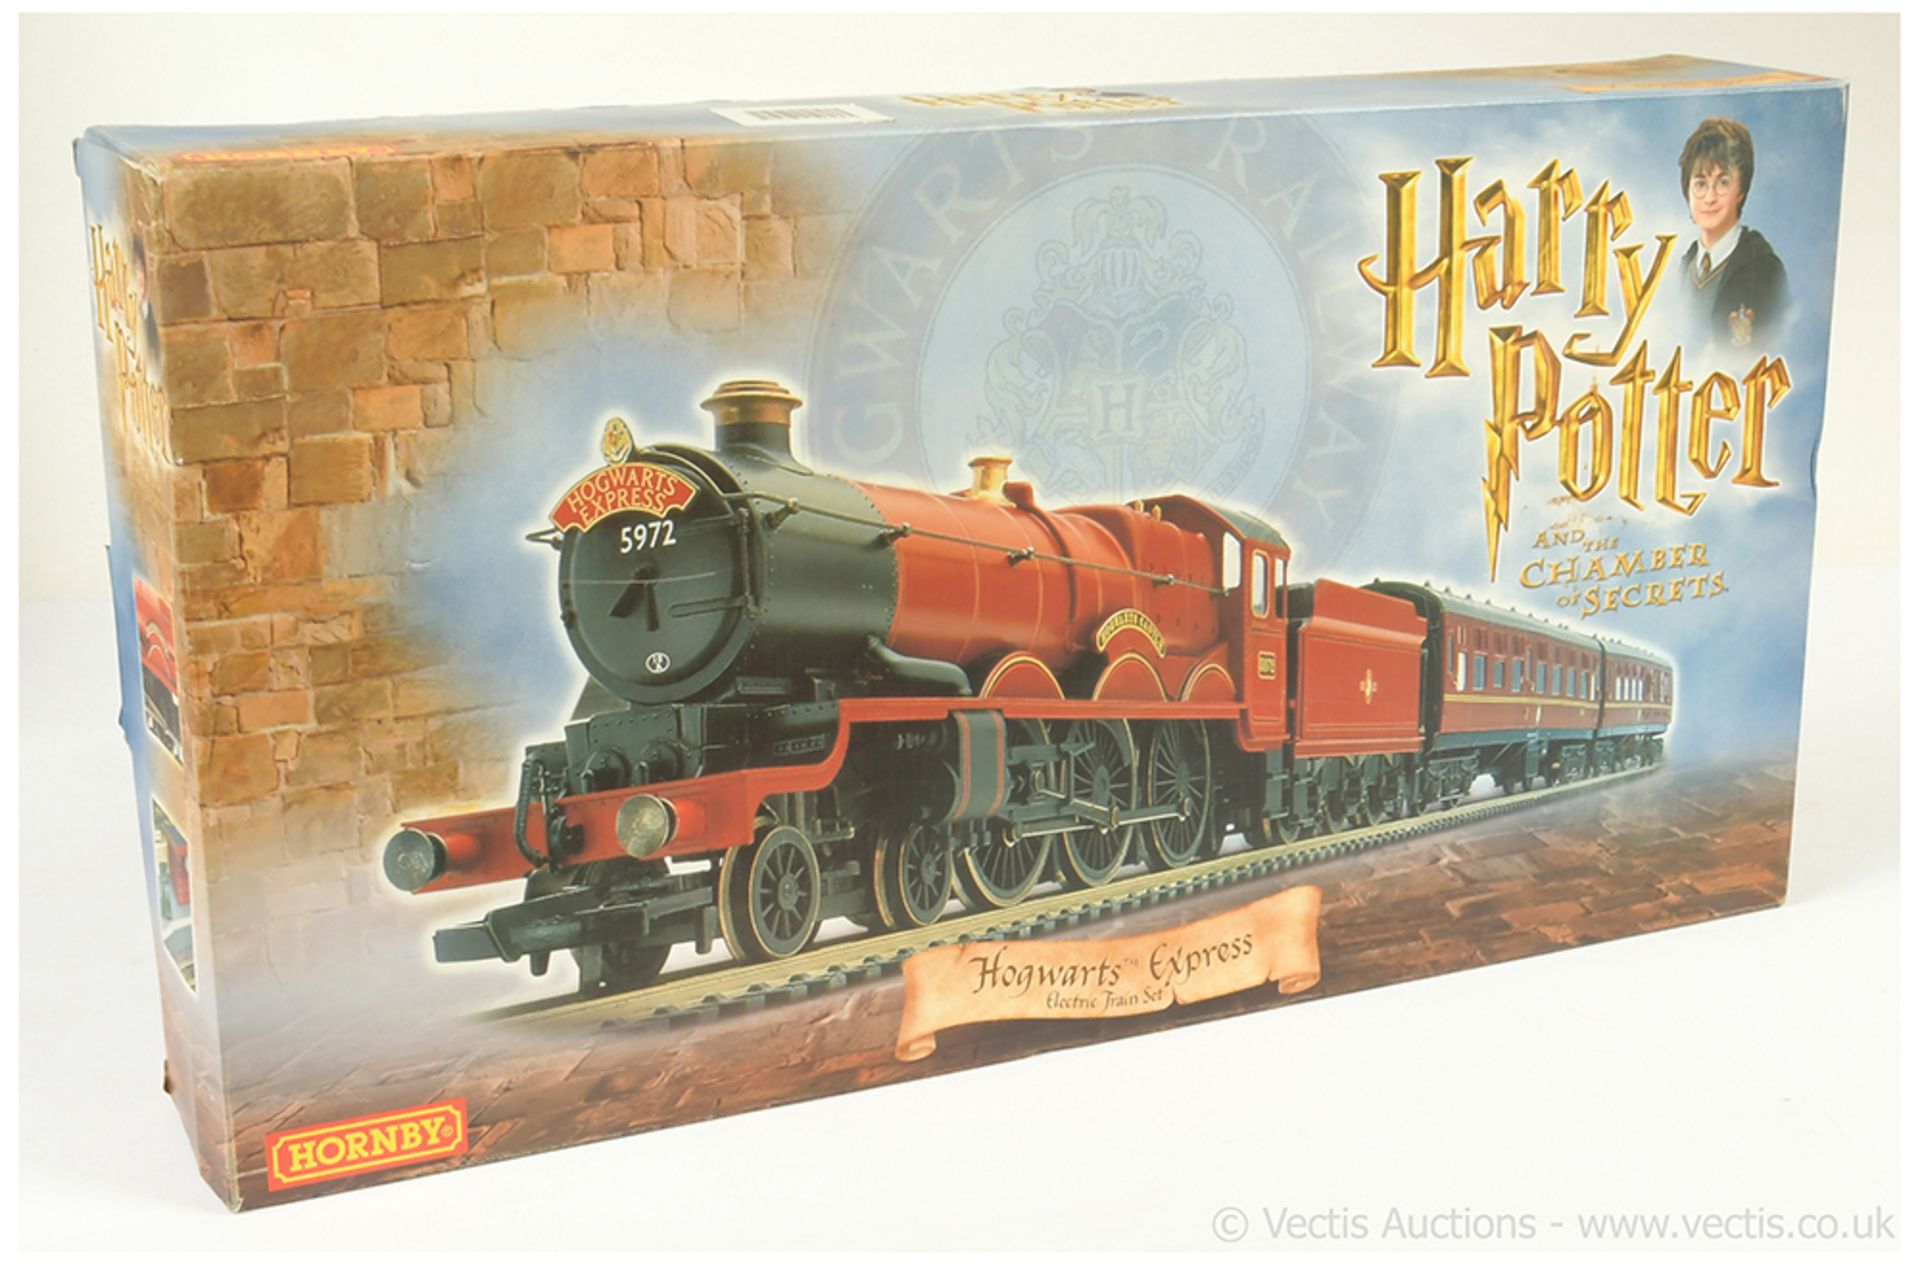 Hornby (China) "Harry Potter & the Chamber